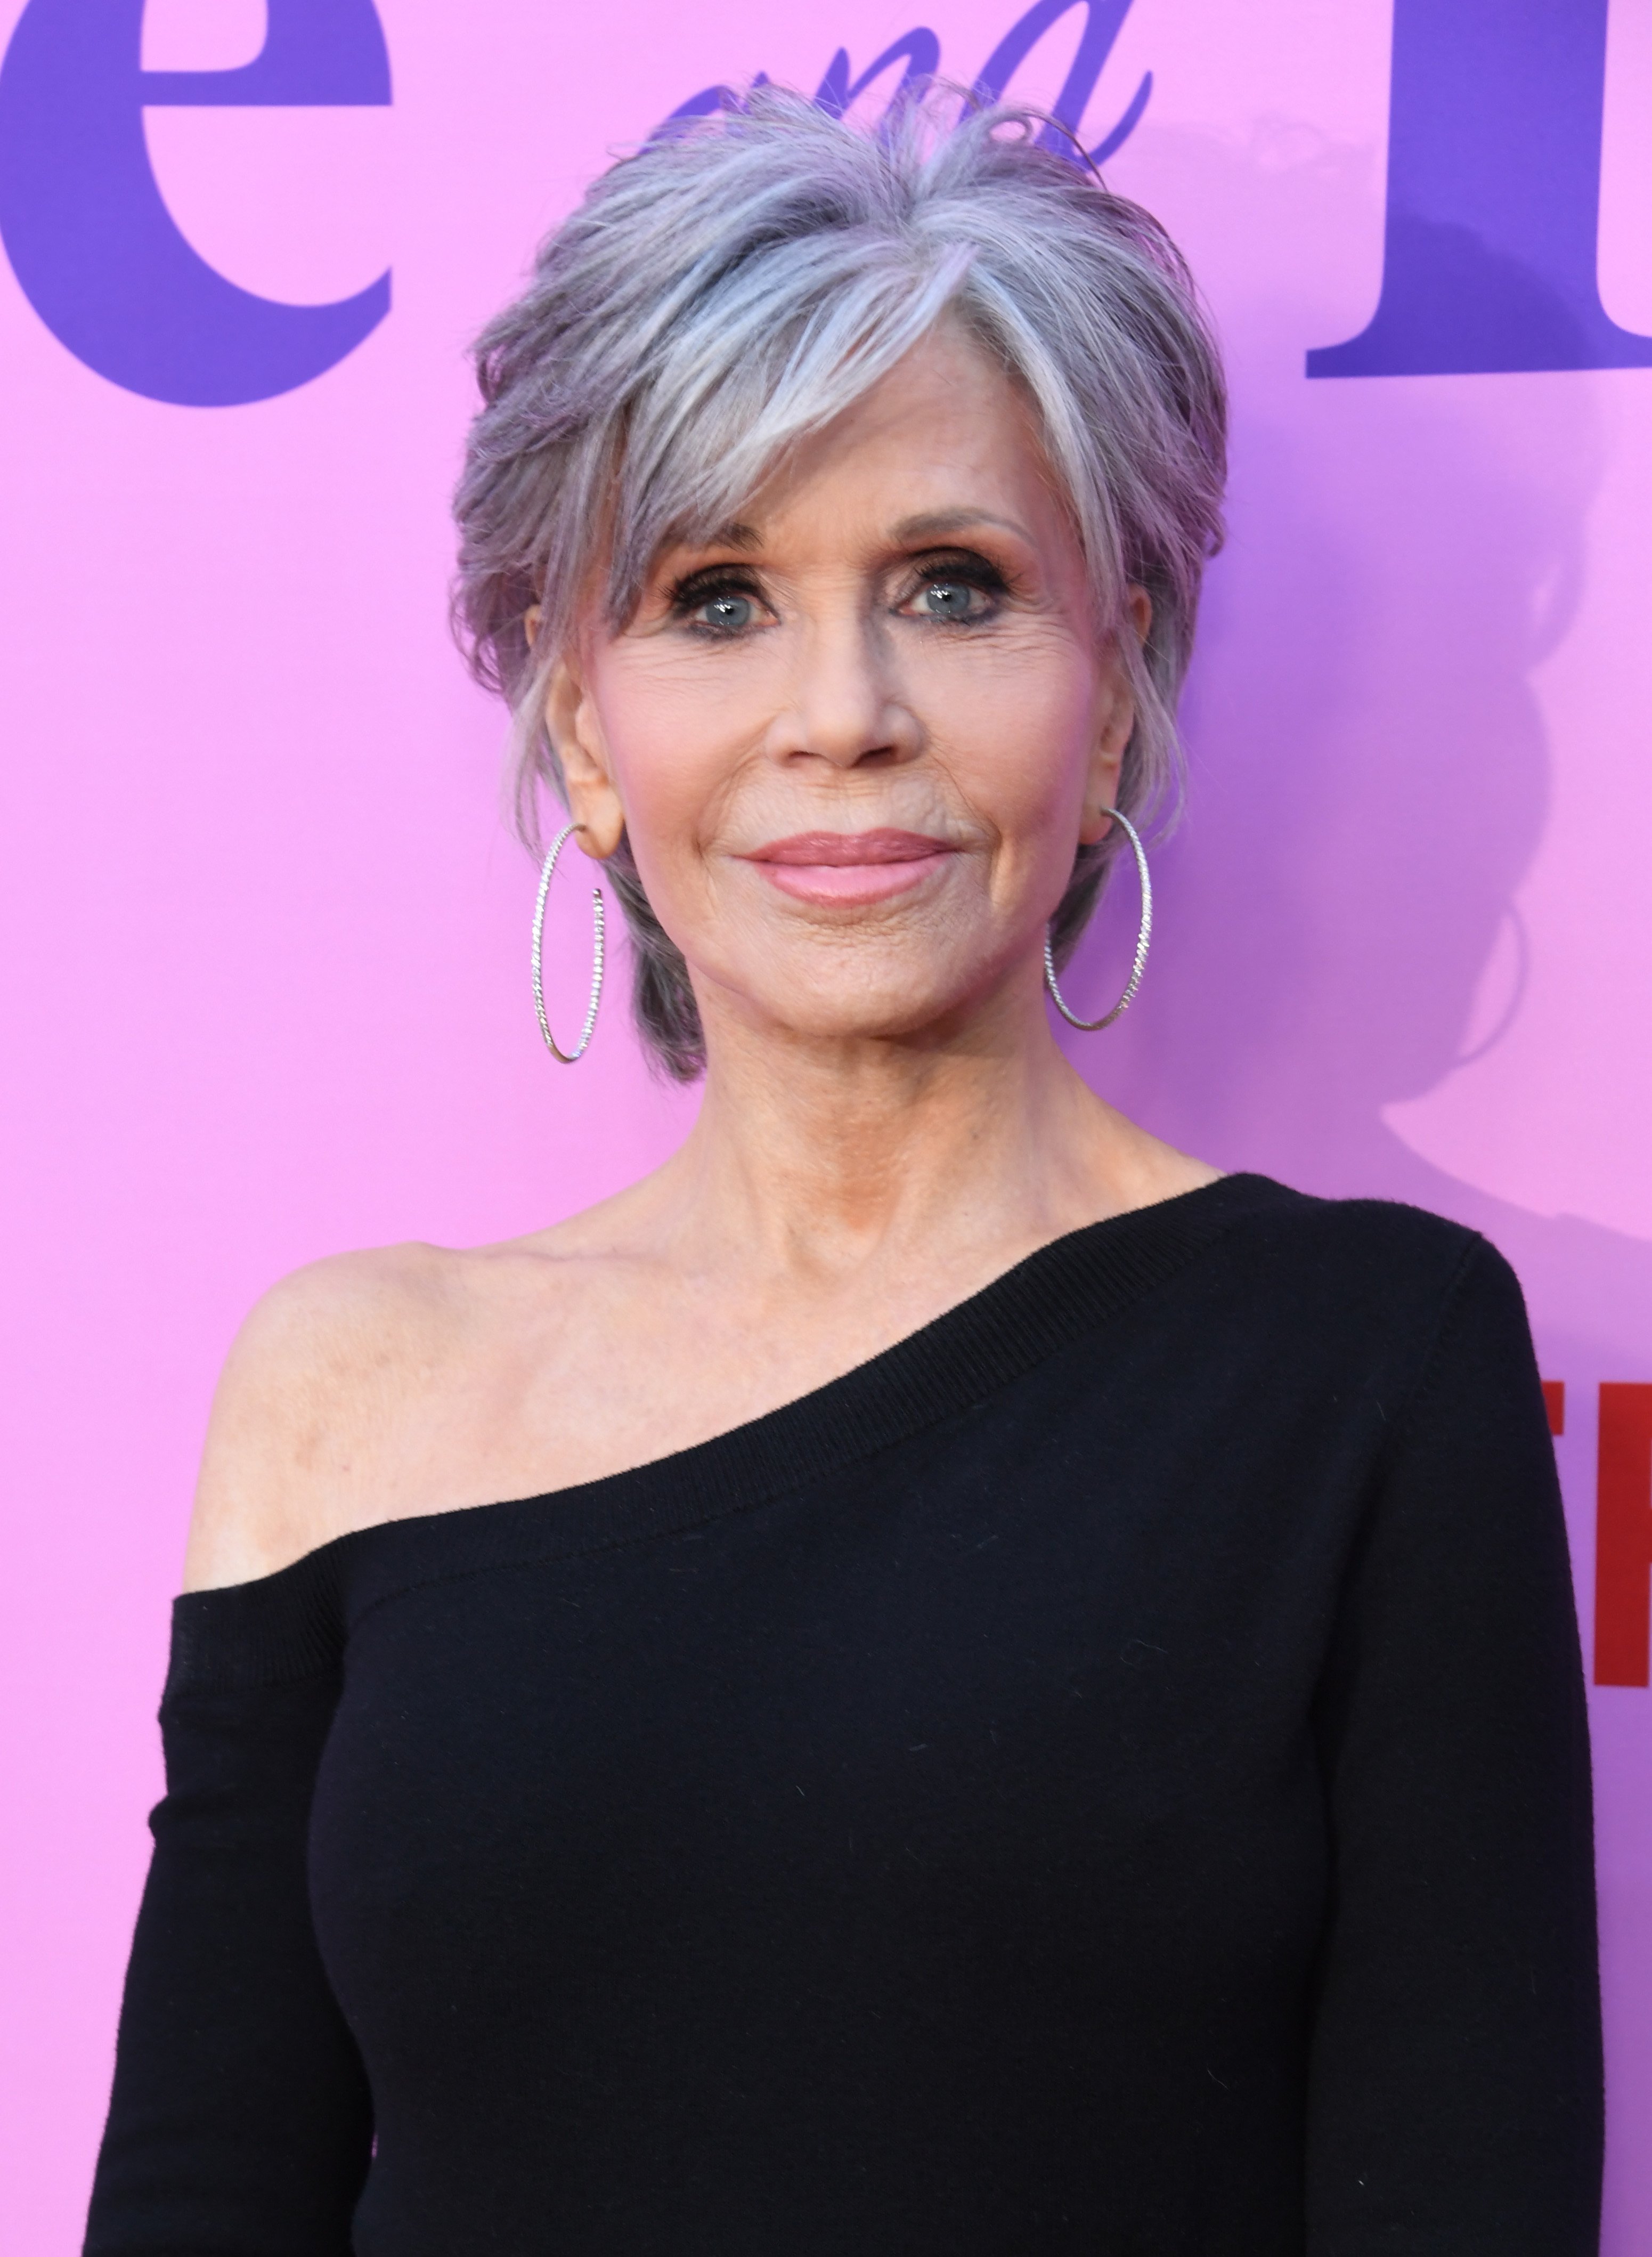 Jane Fonda attends the Los Angeles Special FYC Event For Netflix's "Grace And Frankie" at NeueHouse Los Angeles on April 23, 2022, in Hollywood, California. | Source: Getty Images